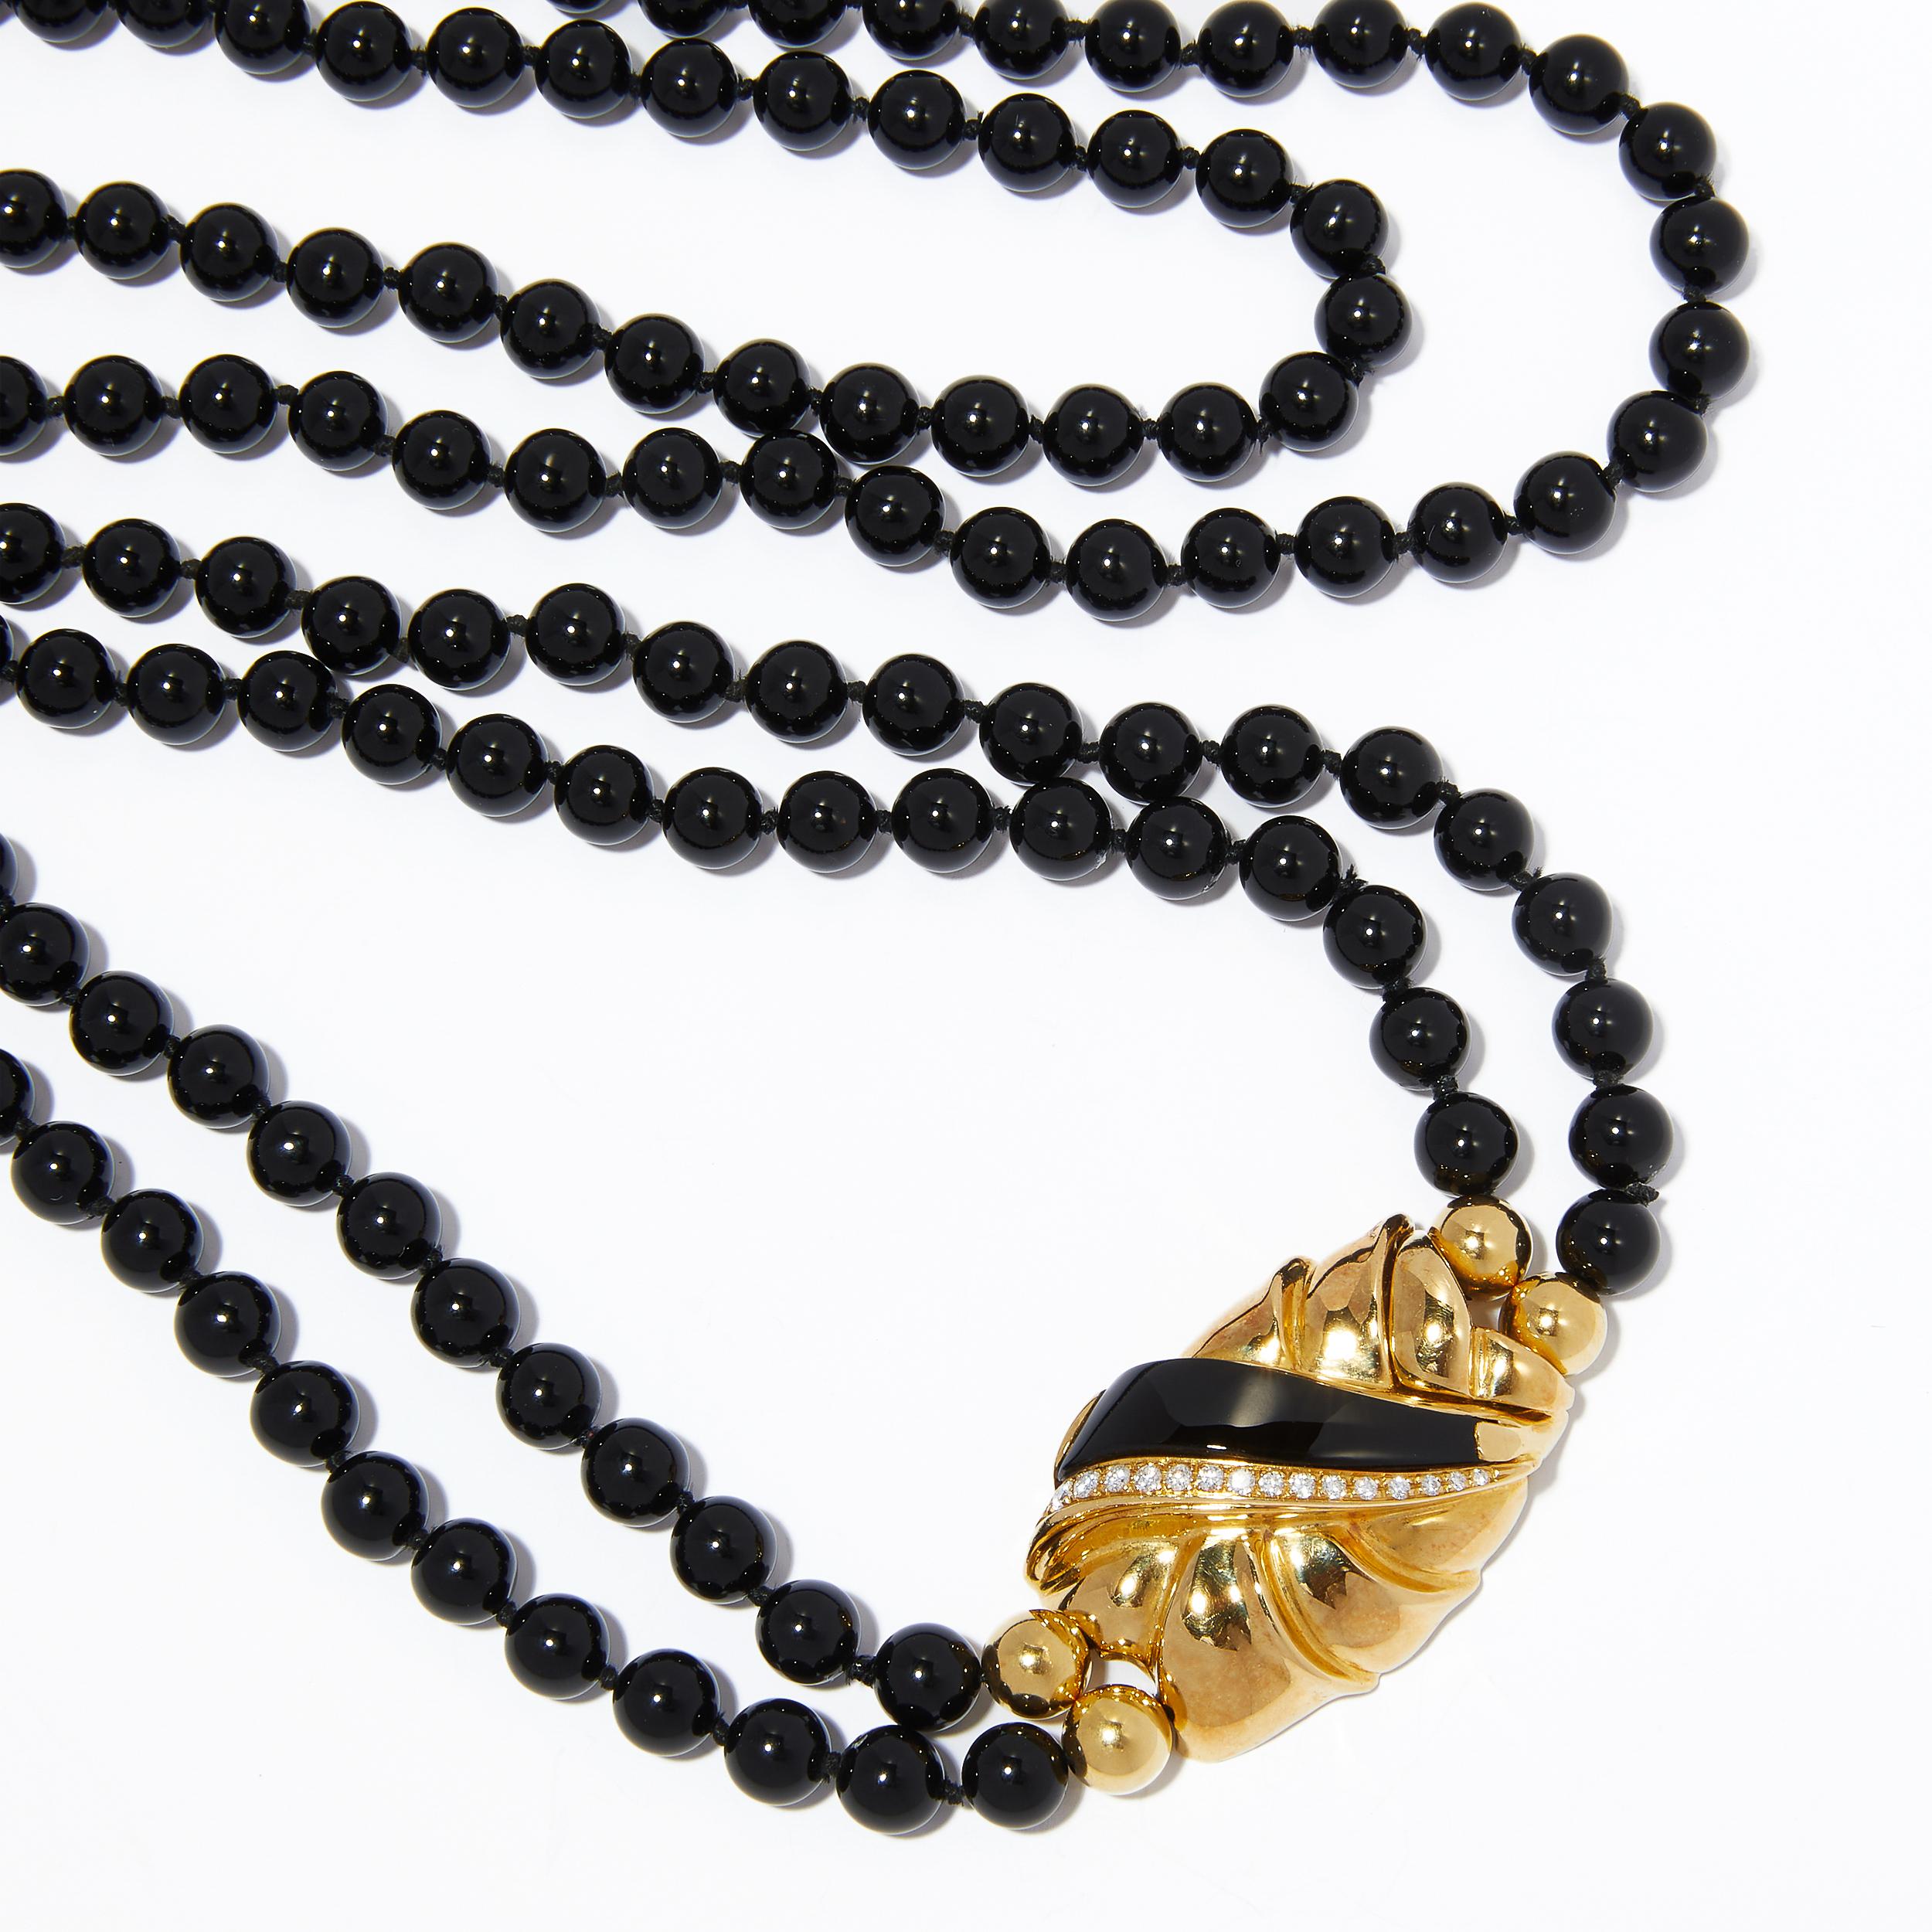 Let the seemingly endless strands of onyx pearls in this beaded necklace add a little spice to your neckline! Attention-grabbing and fabulous, this Italian statement piece is composed of a striking 197 freeform black onyx beads in two cascading